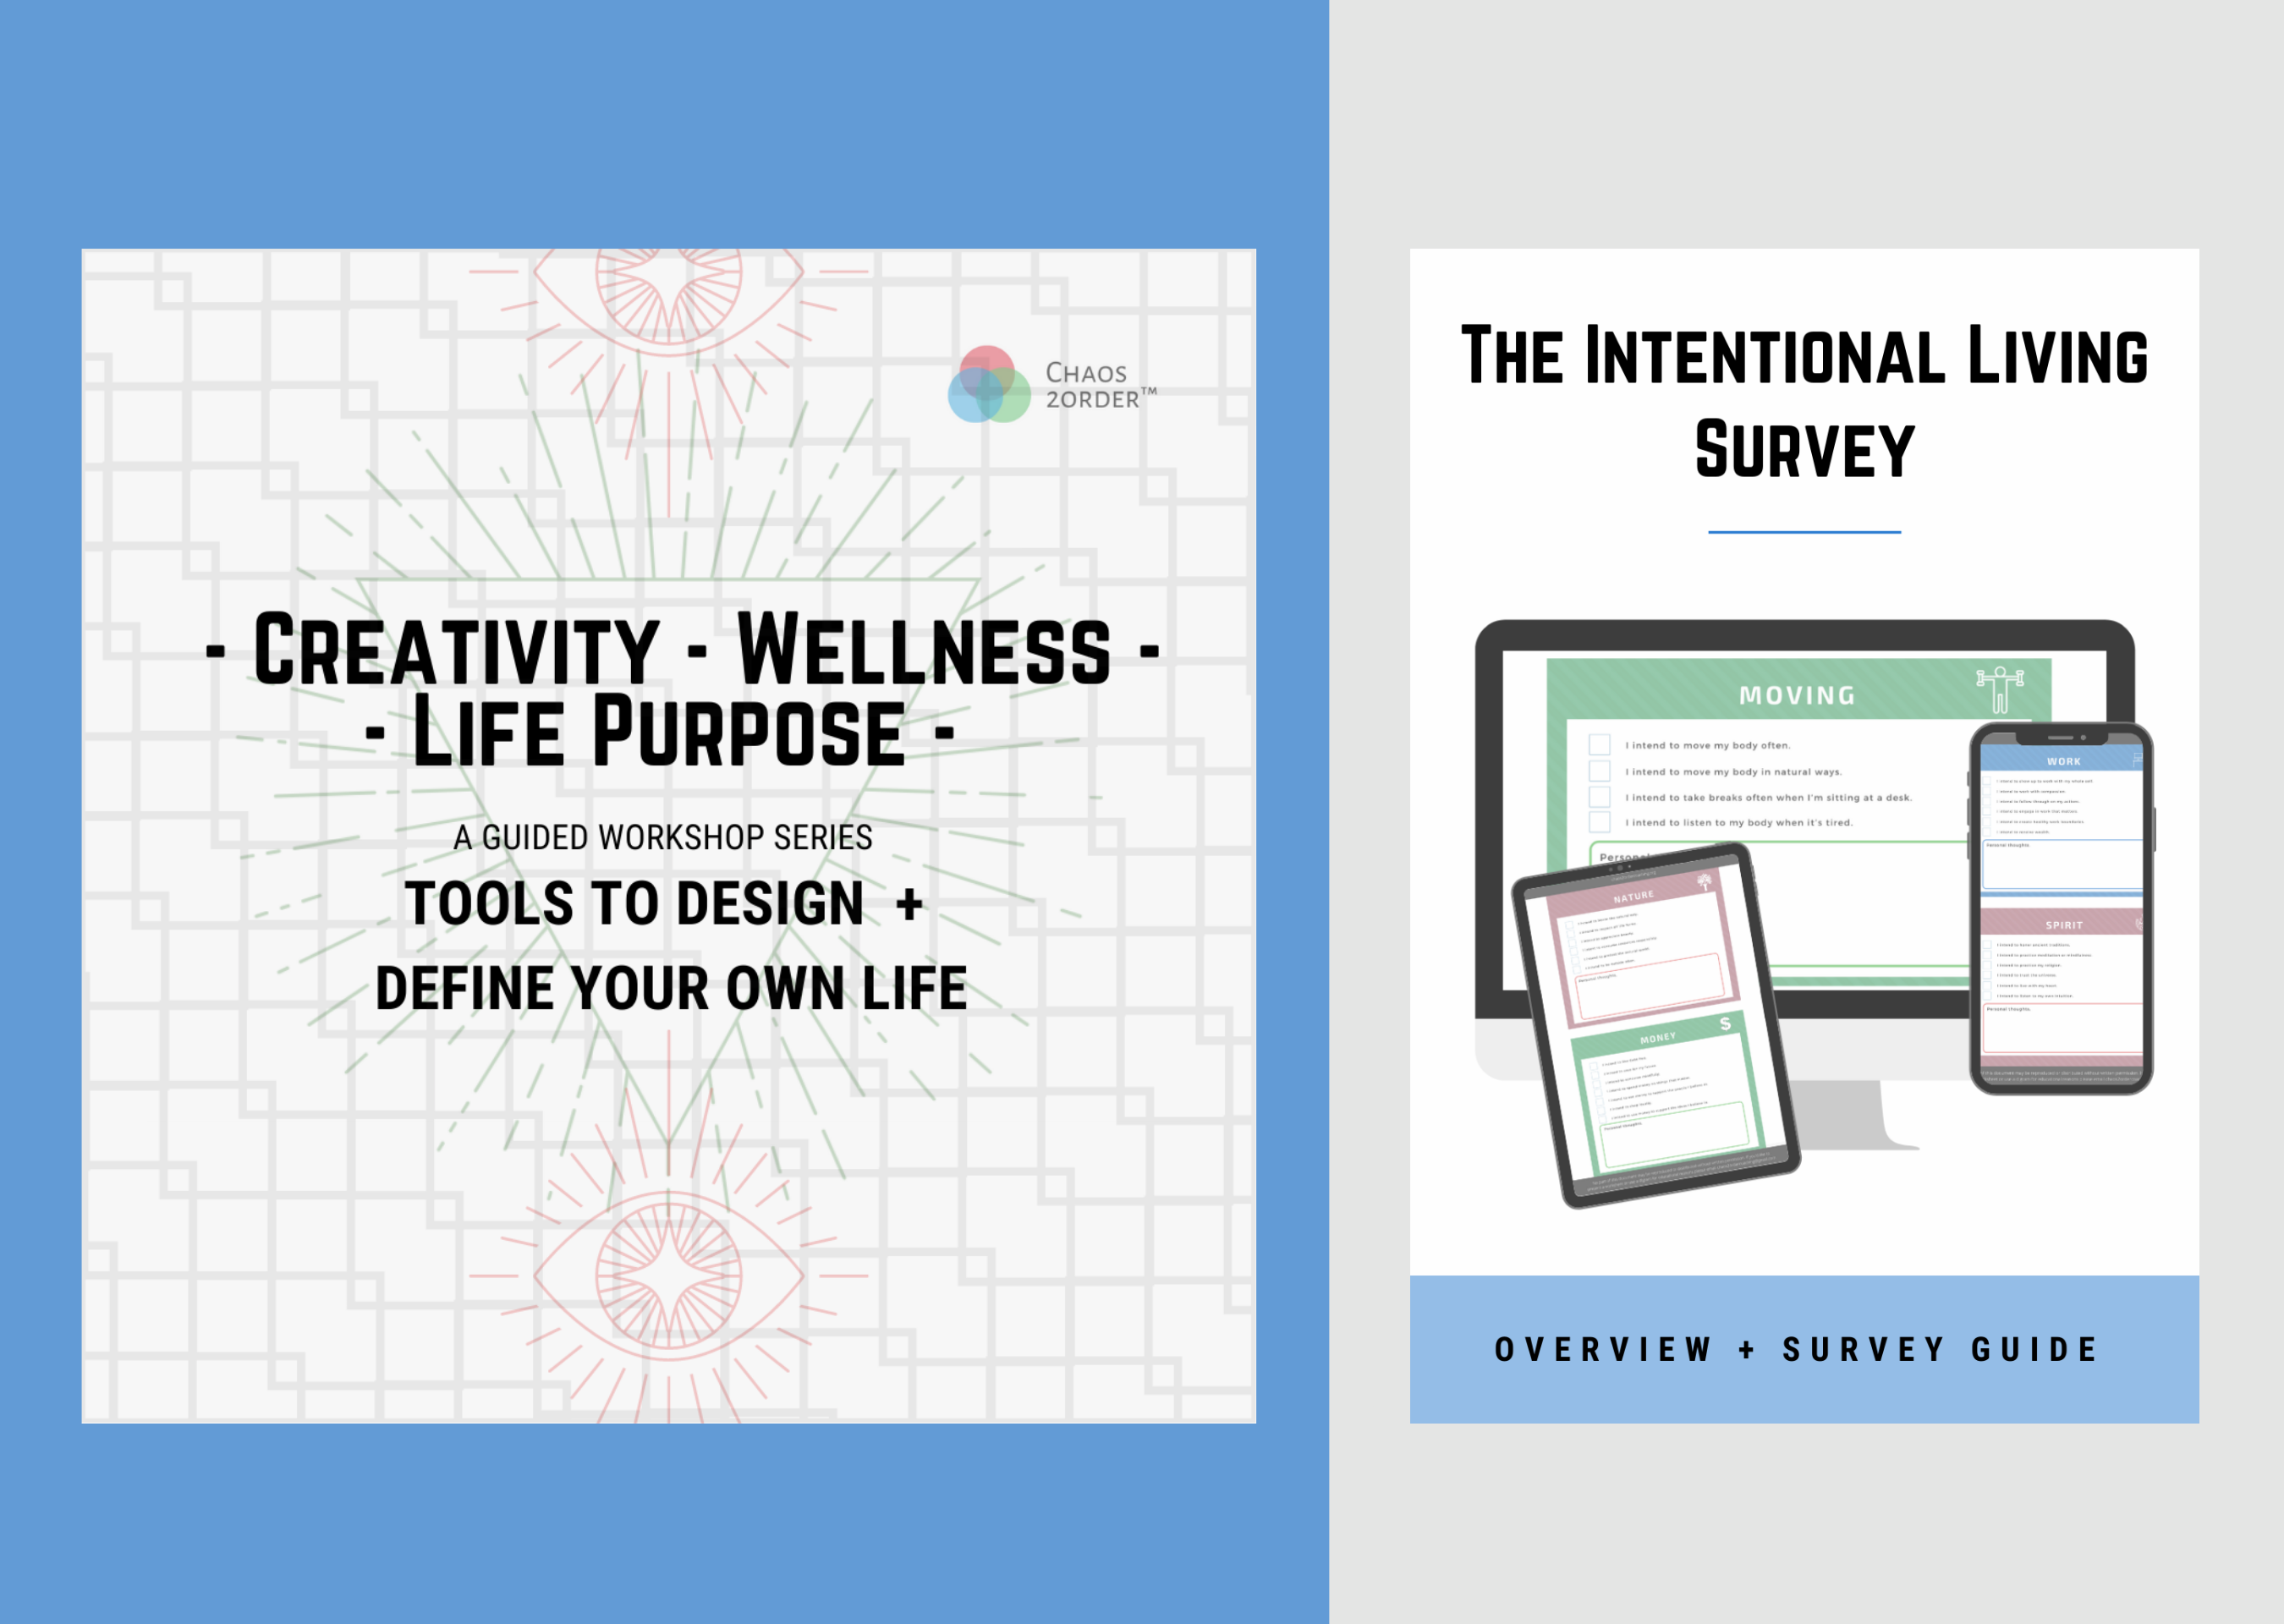 Creativity - Wellness - Life Purpose - Guided Workshop Series, The Intentional Living Survey Guide